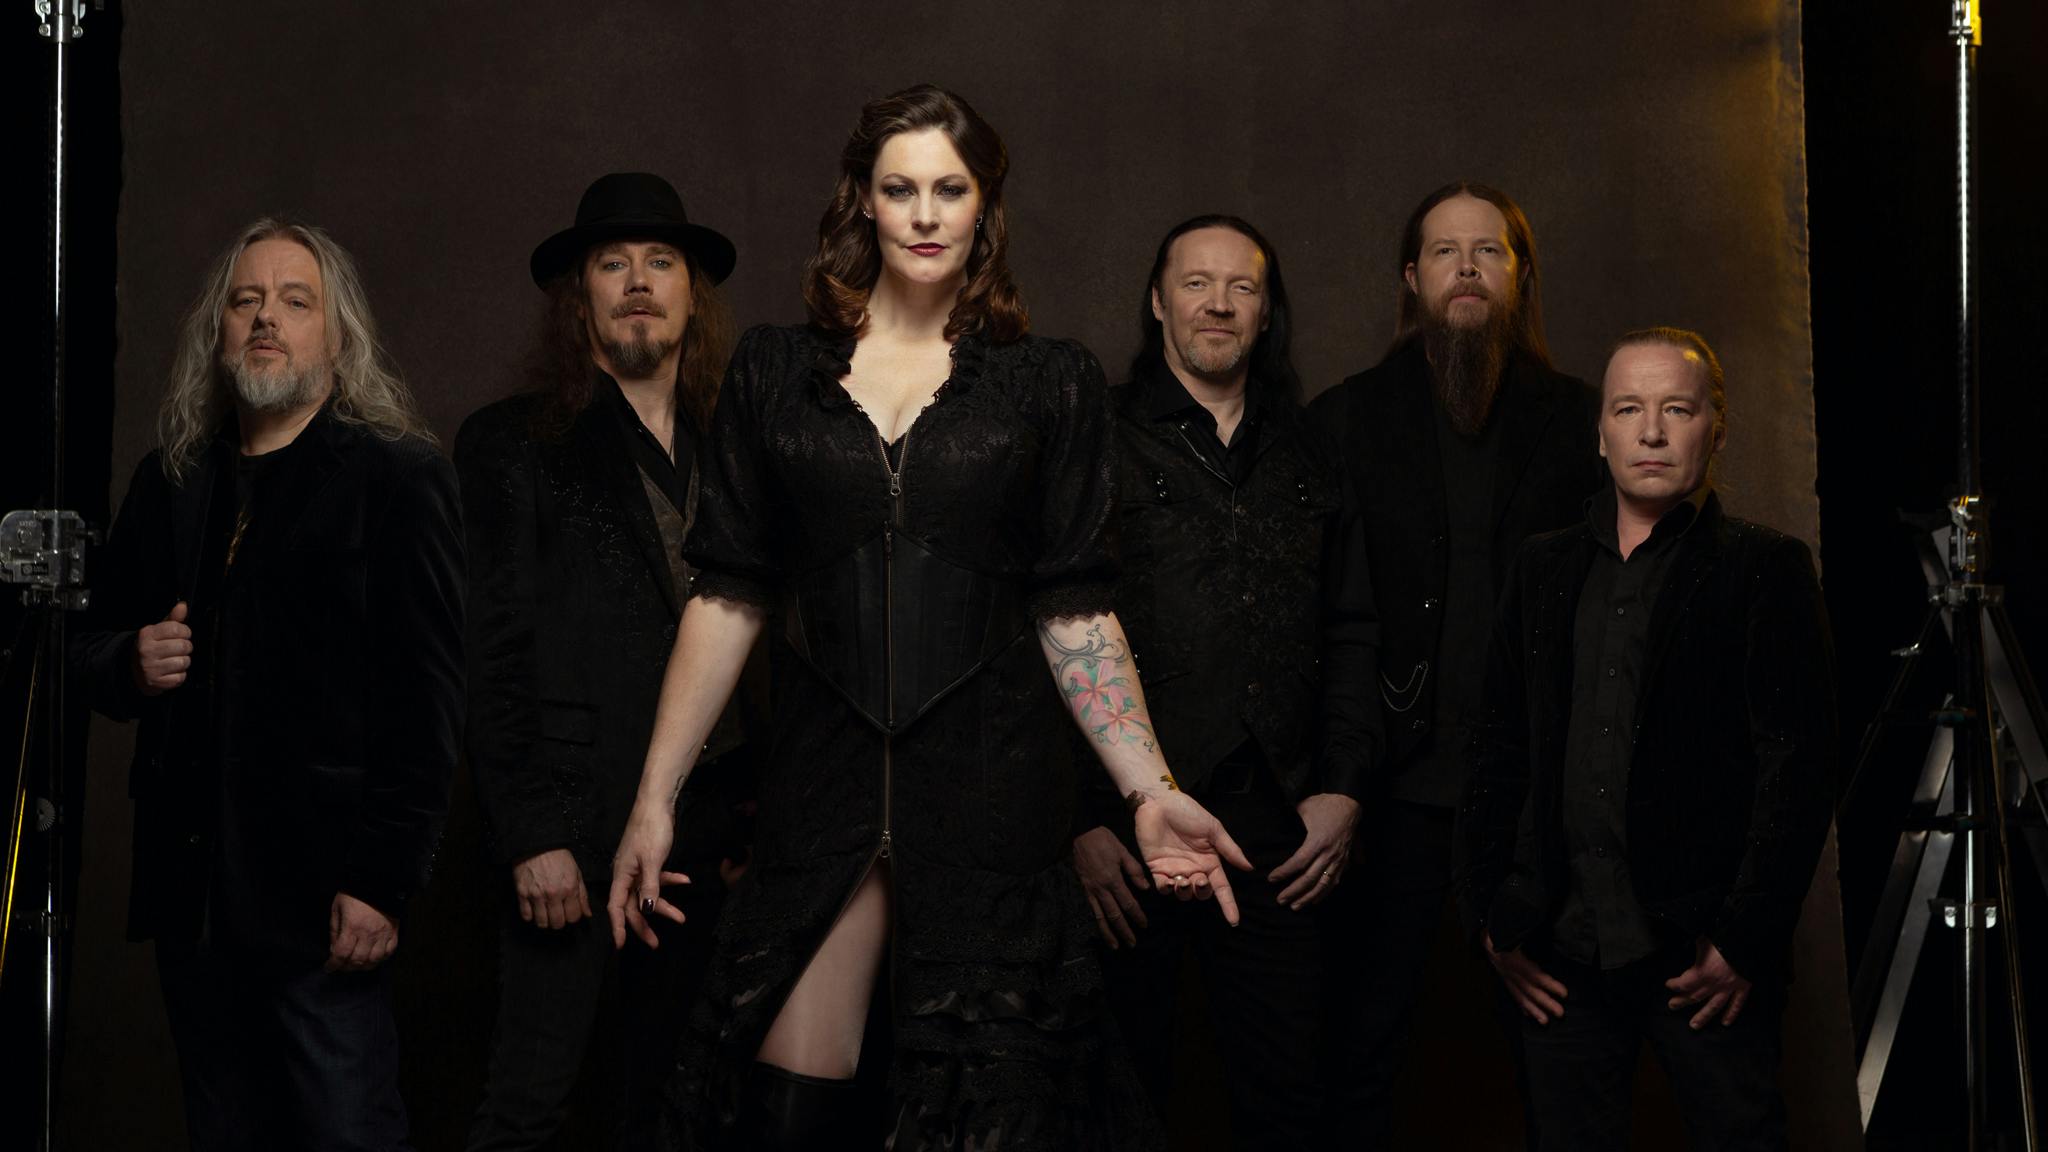 Nightwish: “The whole theme of the album is time, history, humanism, mortality. It’s really optimistic”